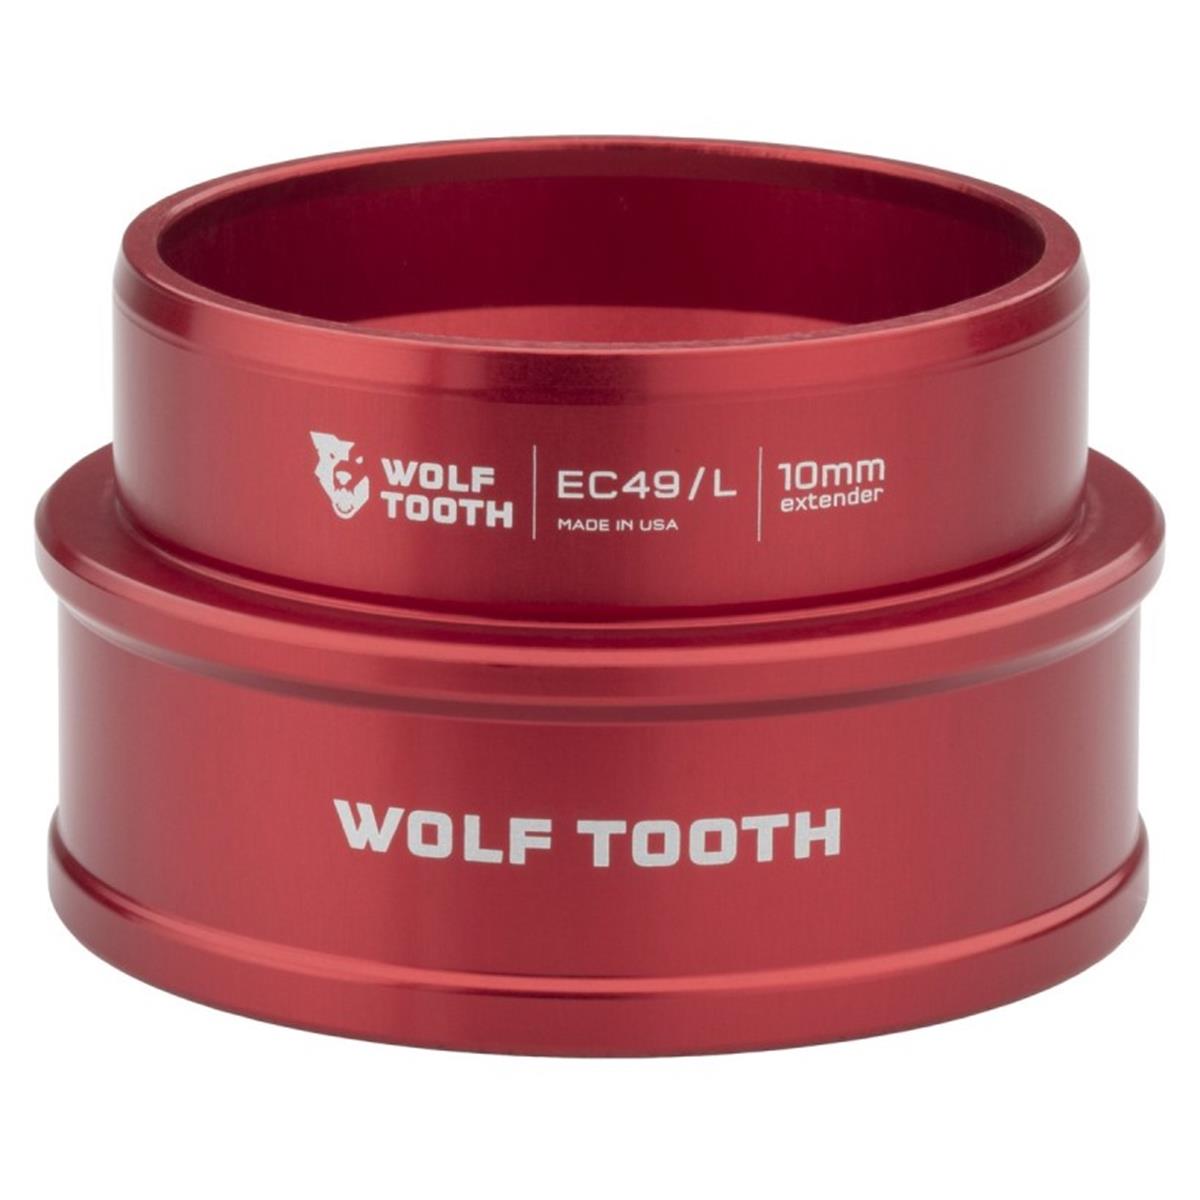 Serie Sterzo wolf tooth Direccion Inferior Ext. Ec49/40